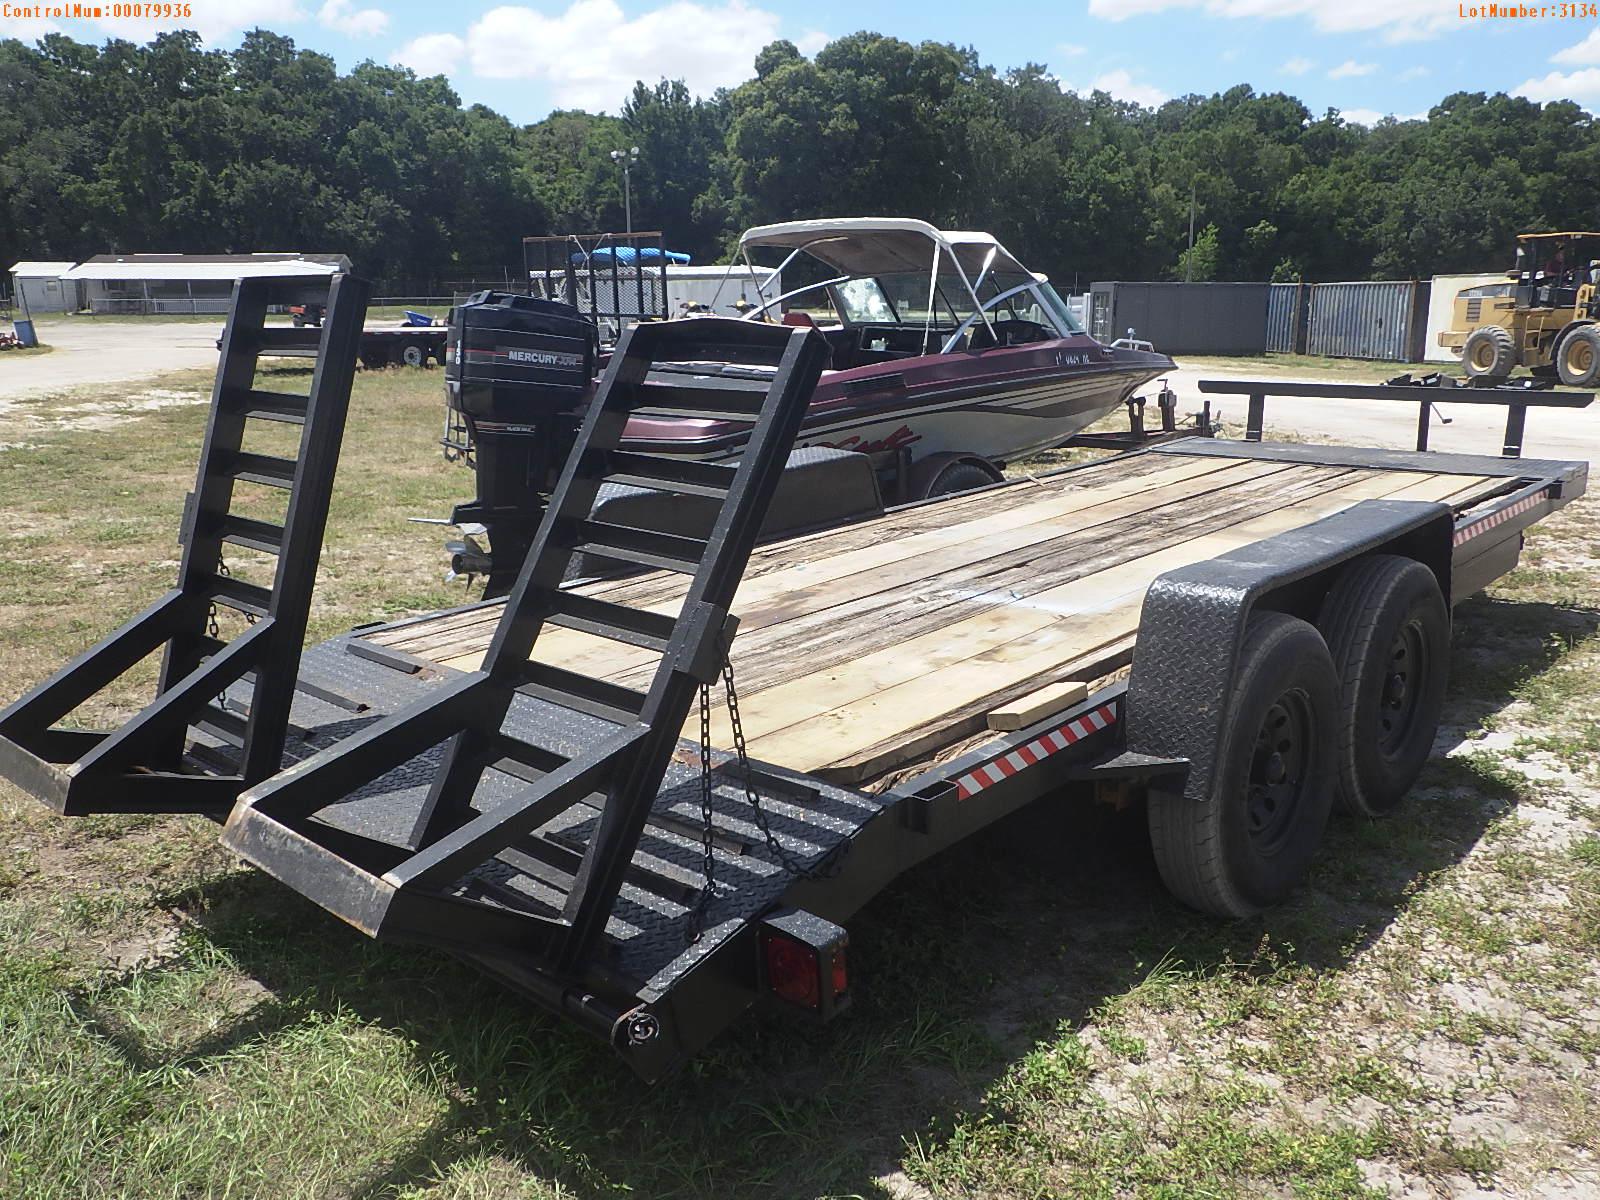 5-03134 (Trailers-Utility flatbed)  Seller:Private/Dealer 1999 RDO FLAT BED TAND